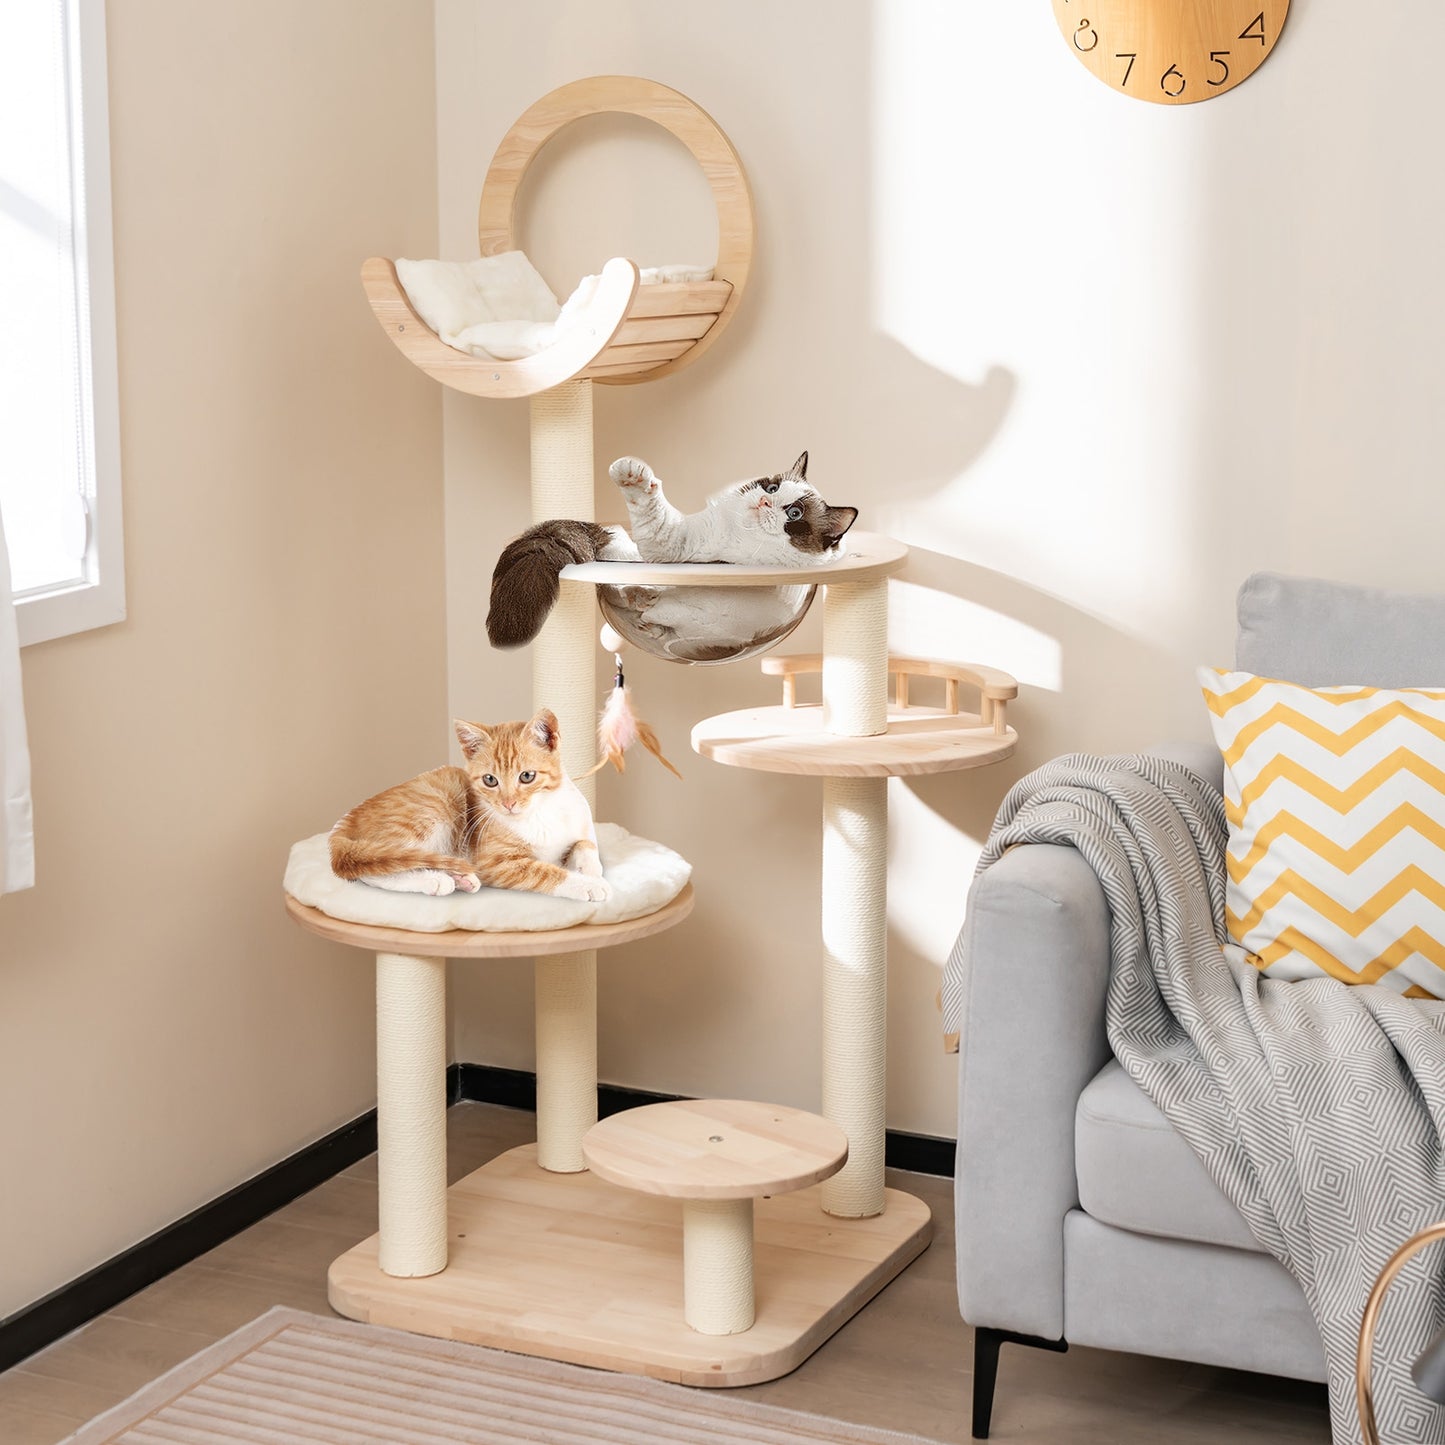 4-in-1 Large Wooden Cat Tower with Space Capsule Nest for Indoor Cats